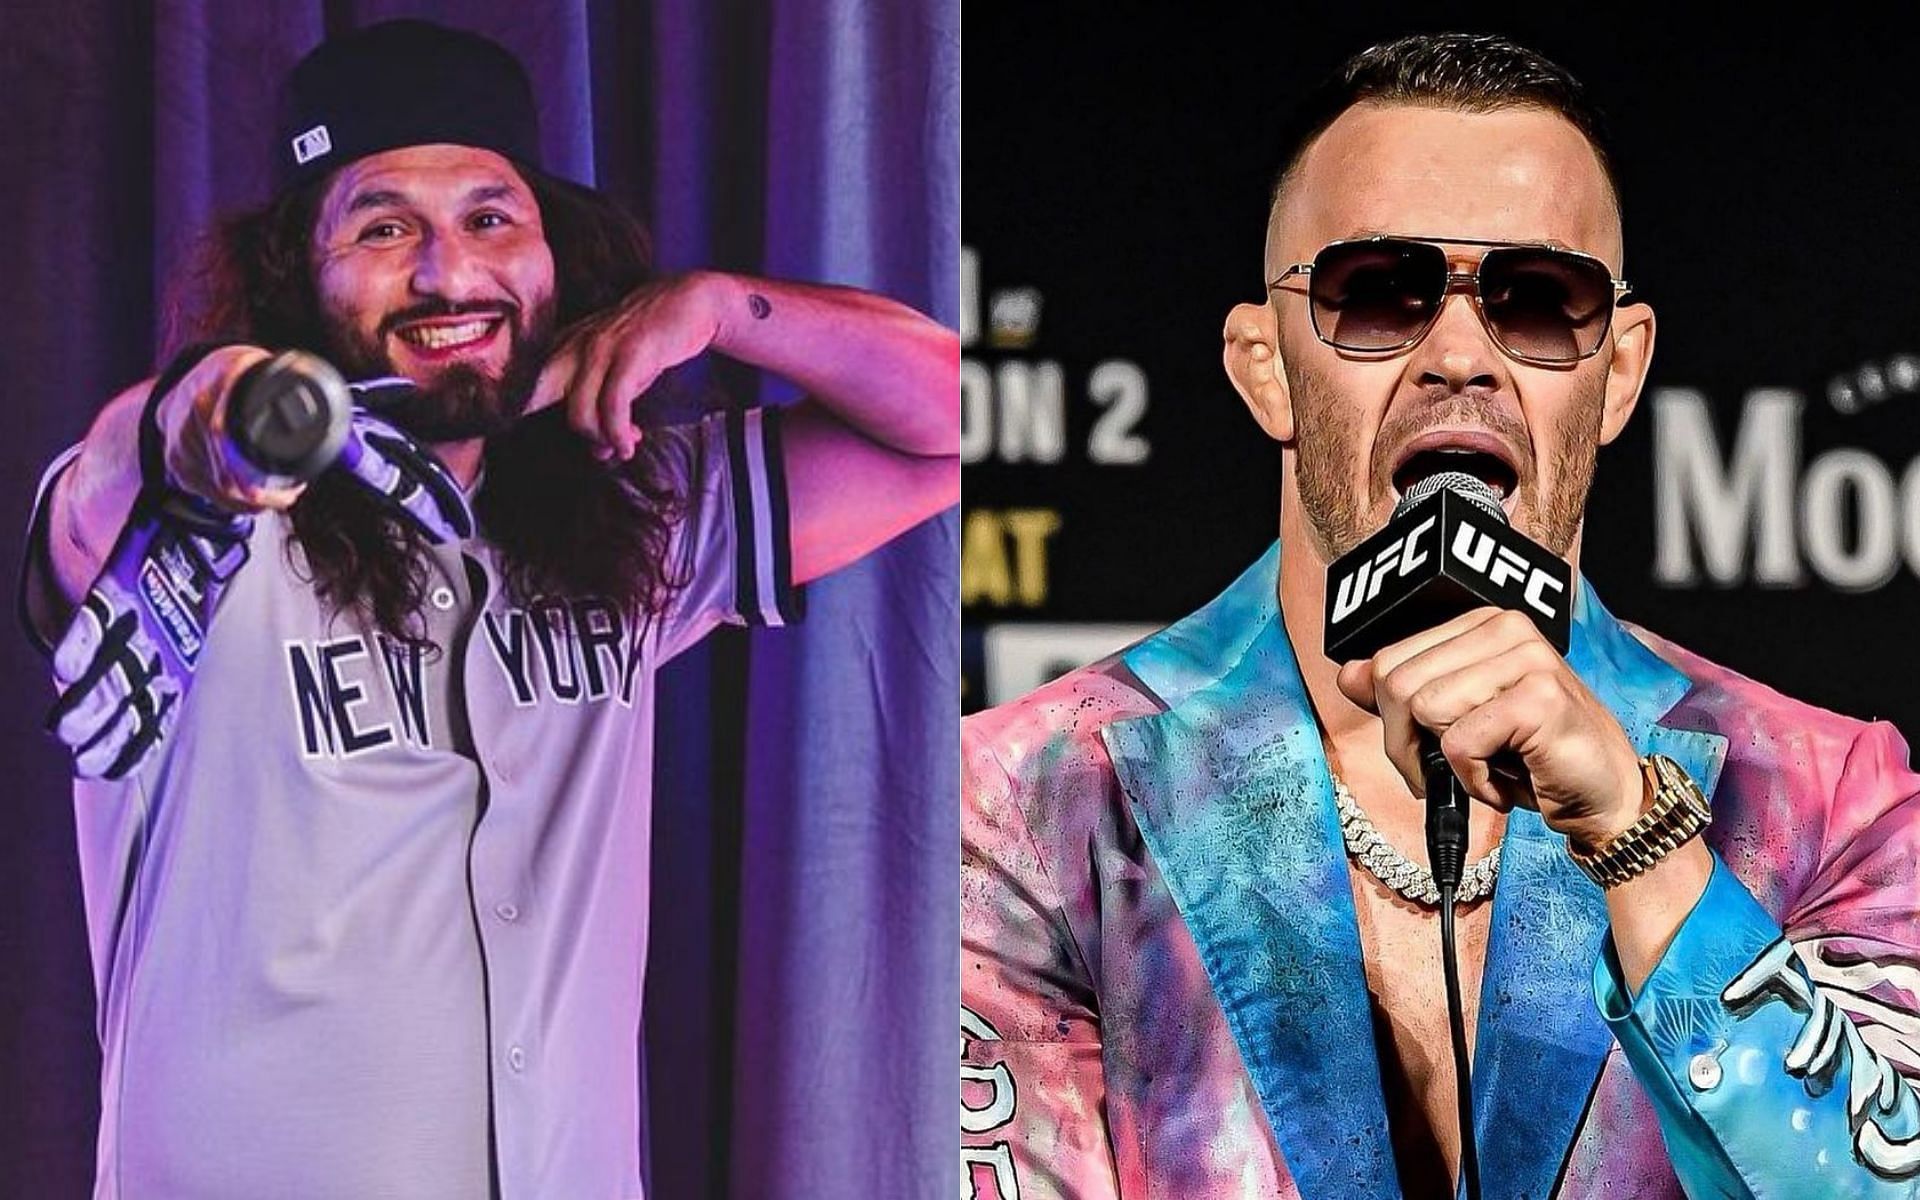 Jorge Masvidal (left) and Colby Covington (right)